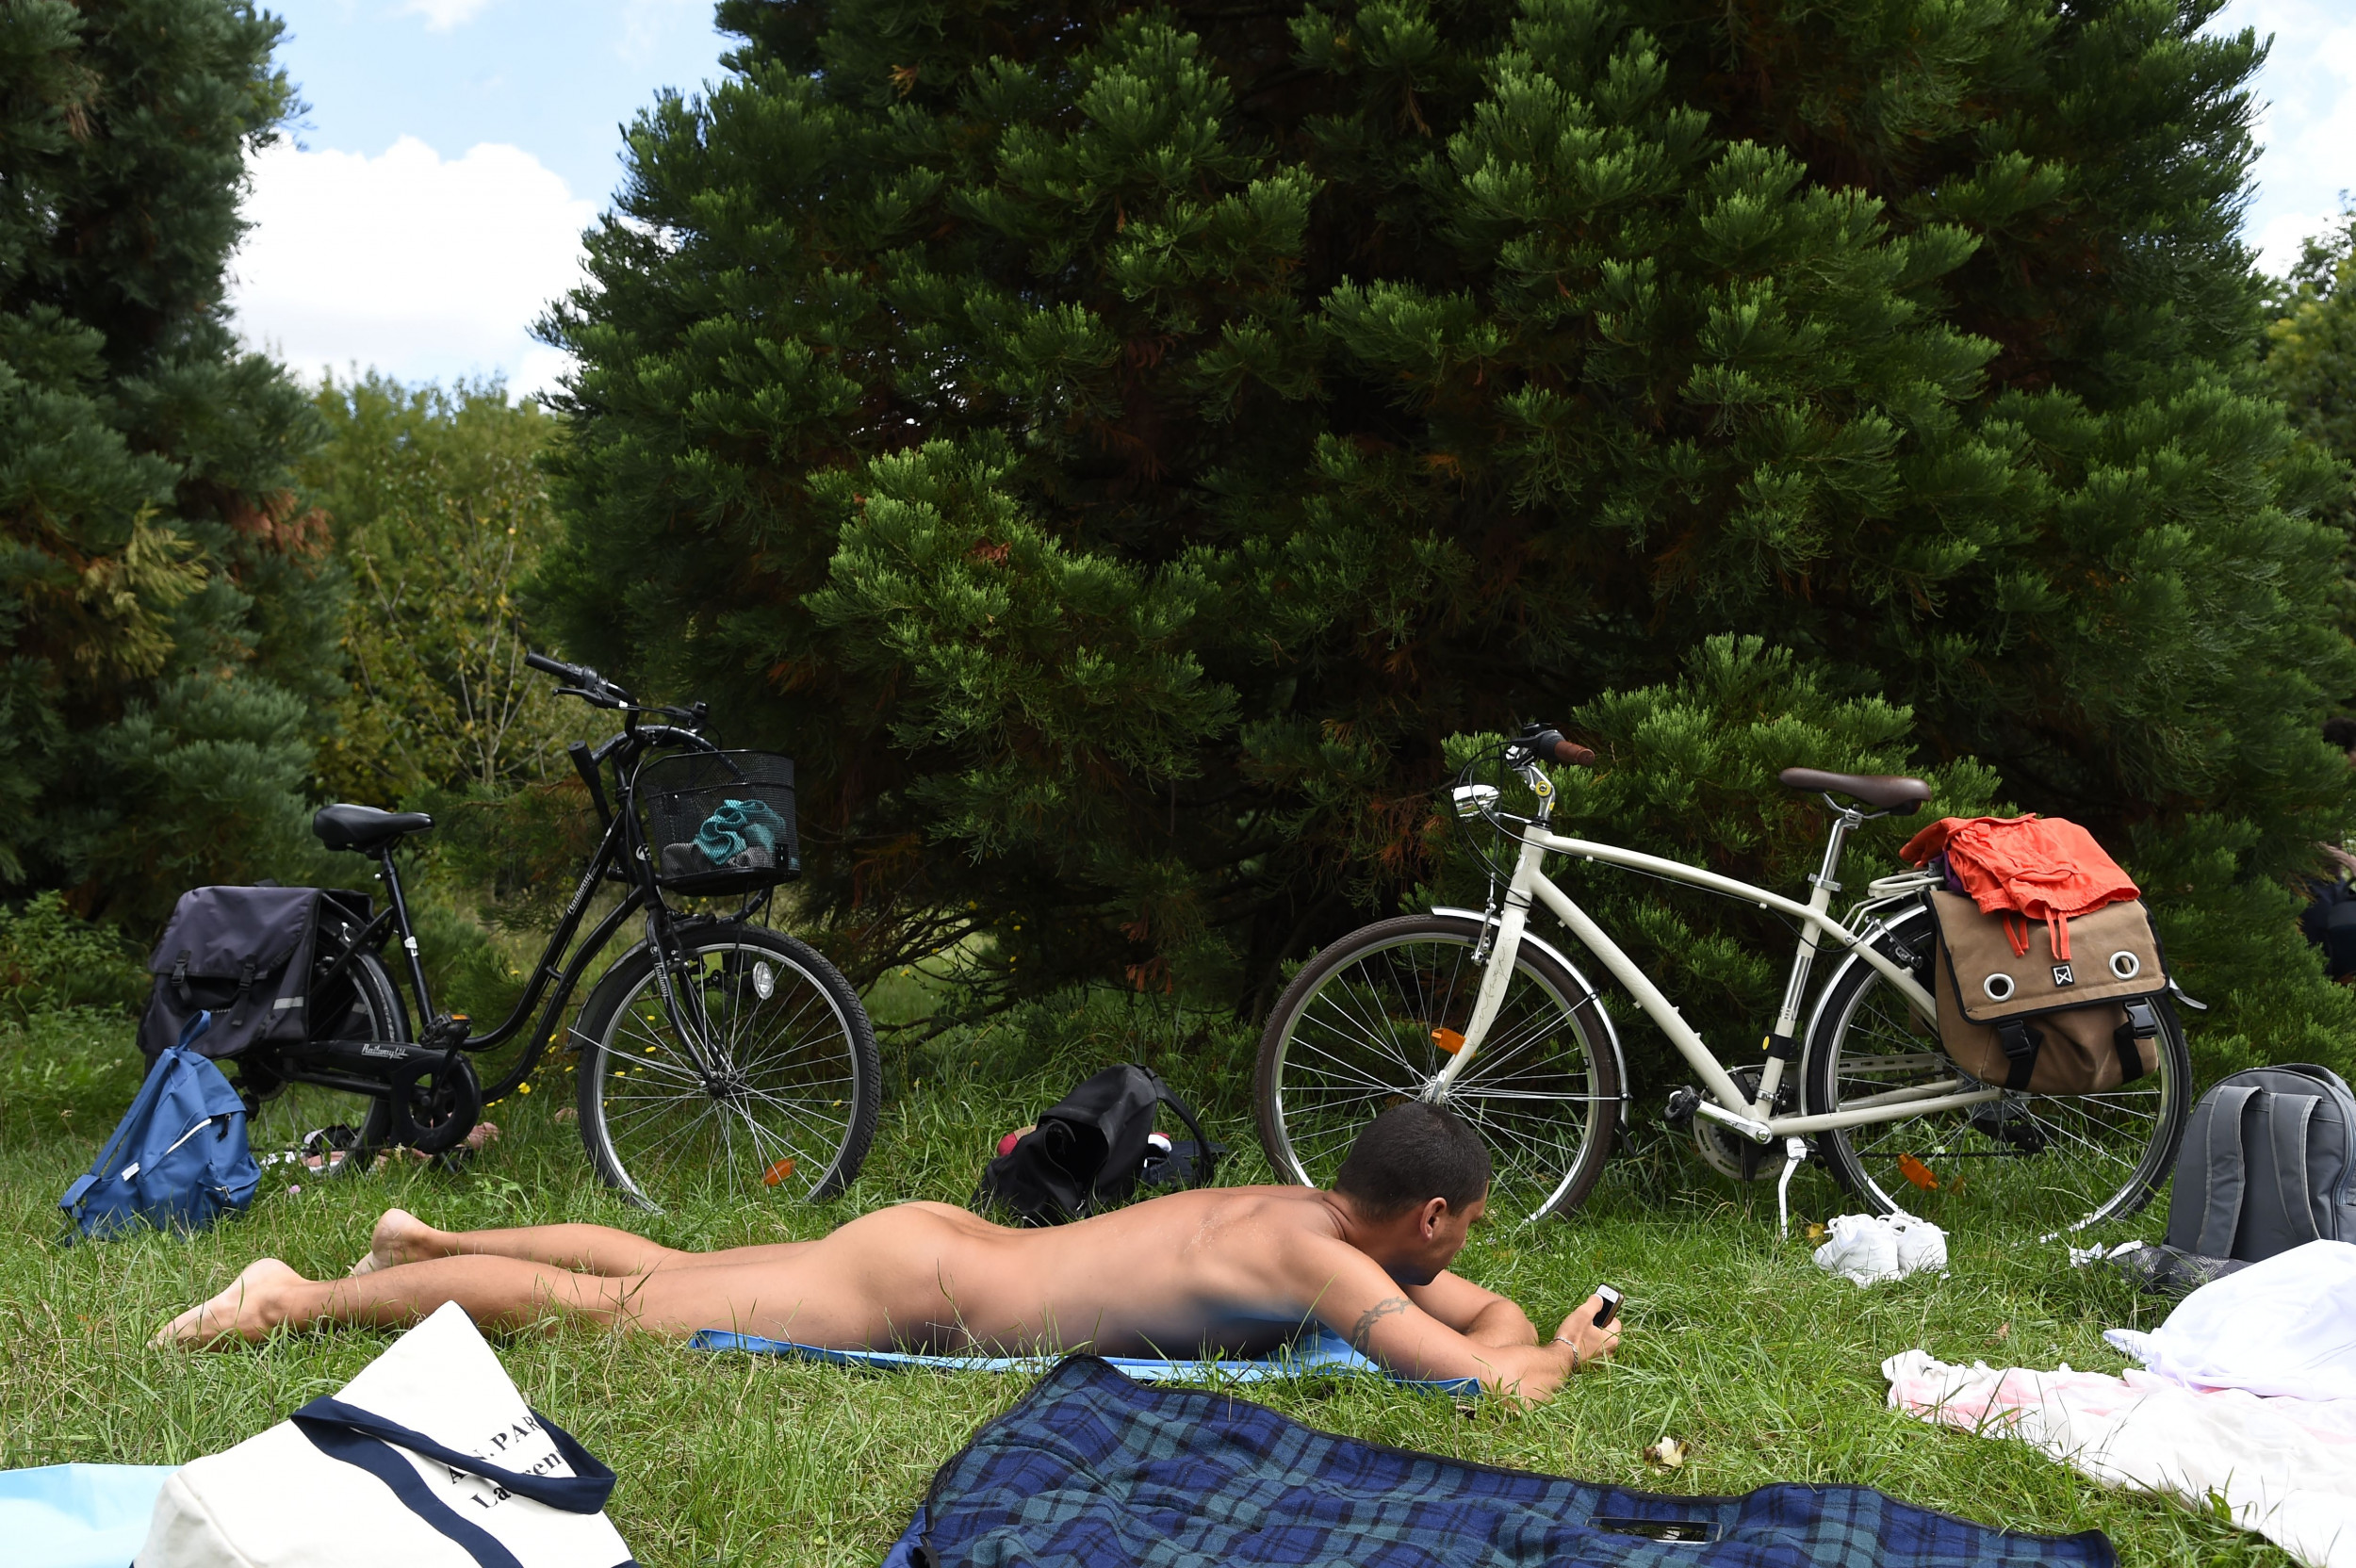 Perverts Wanting To Sneak A Peek Are Ruining Paris Parks Nude Zone, Say Naturists hq picture